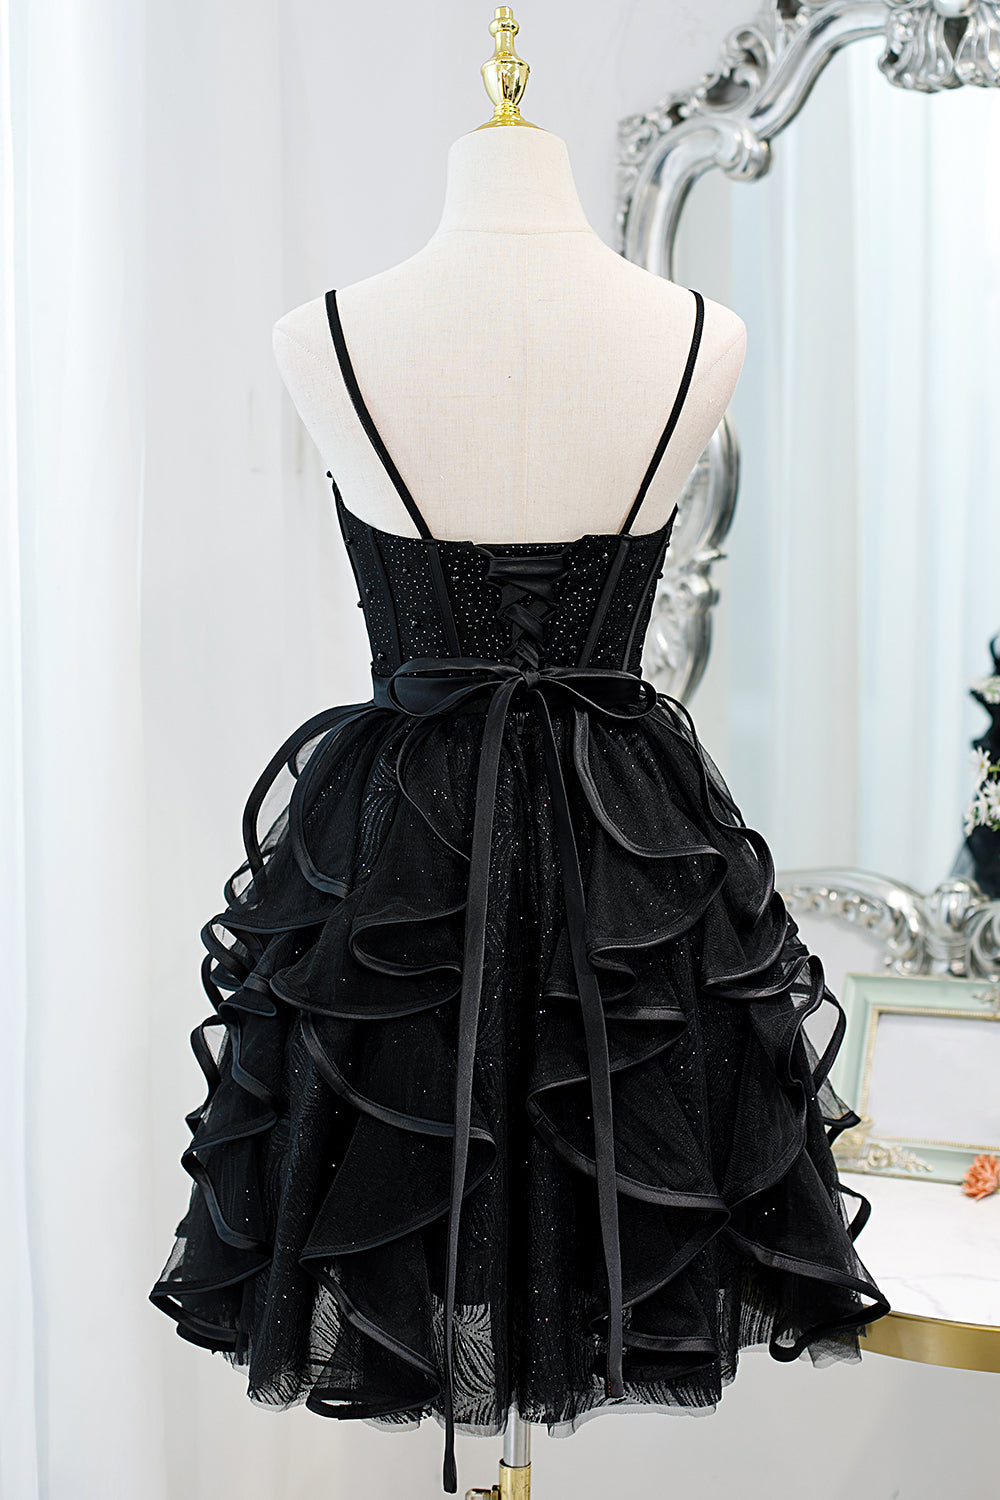 Party Dresses Online Shop, Black Sequins Spaghetti Straps Tulle Short Homecoming Dresses